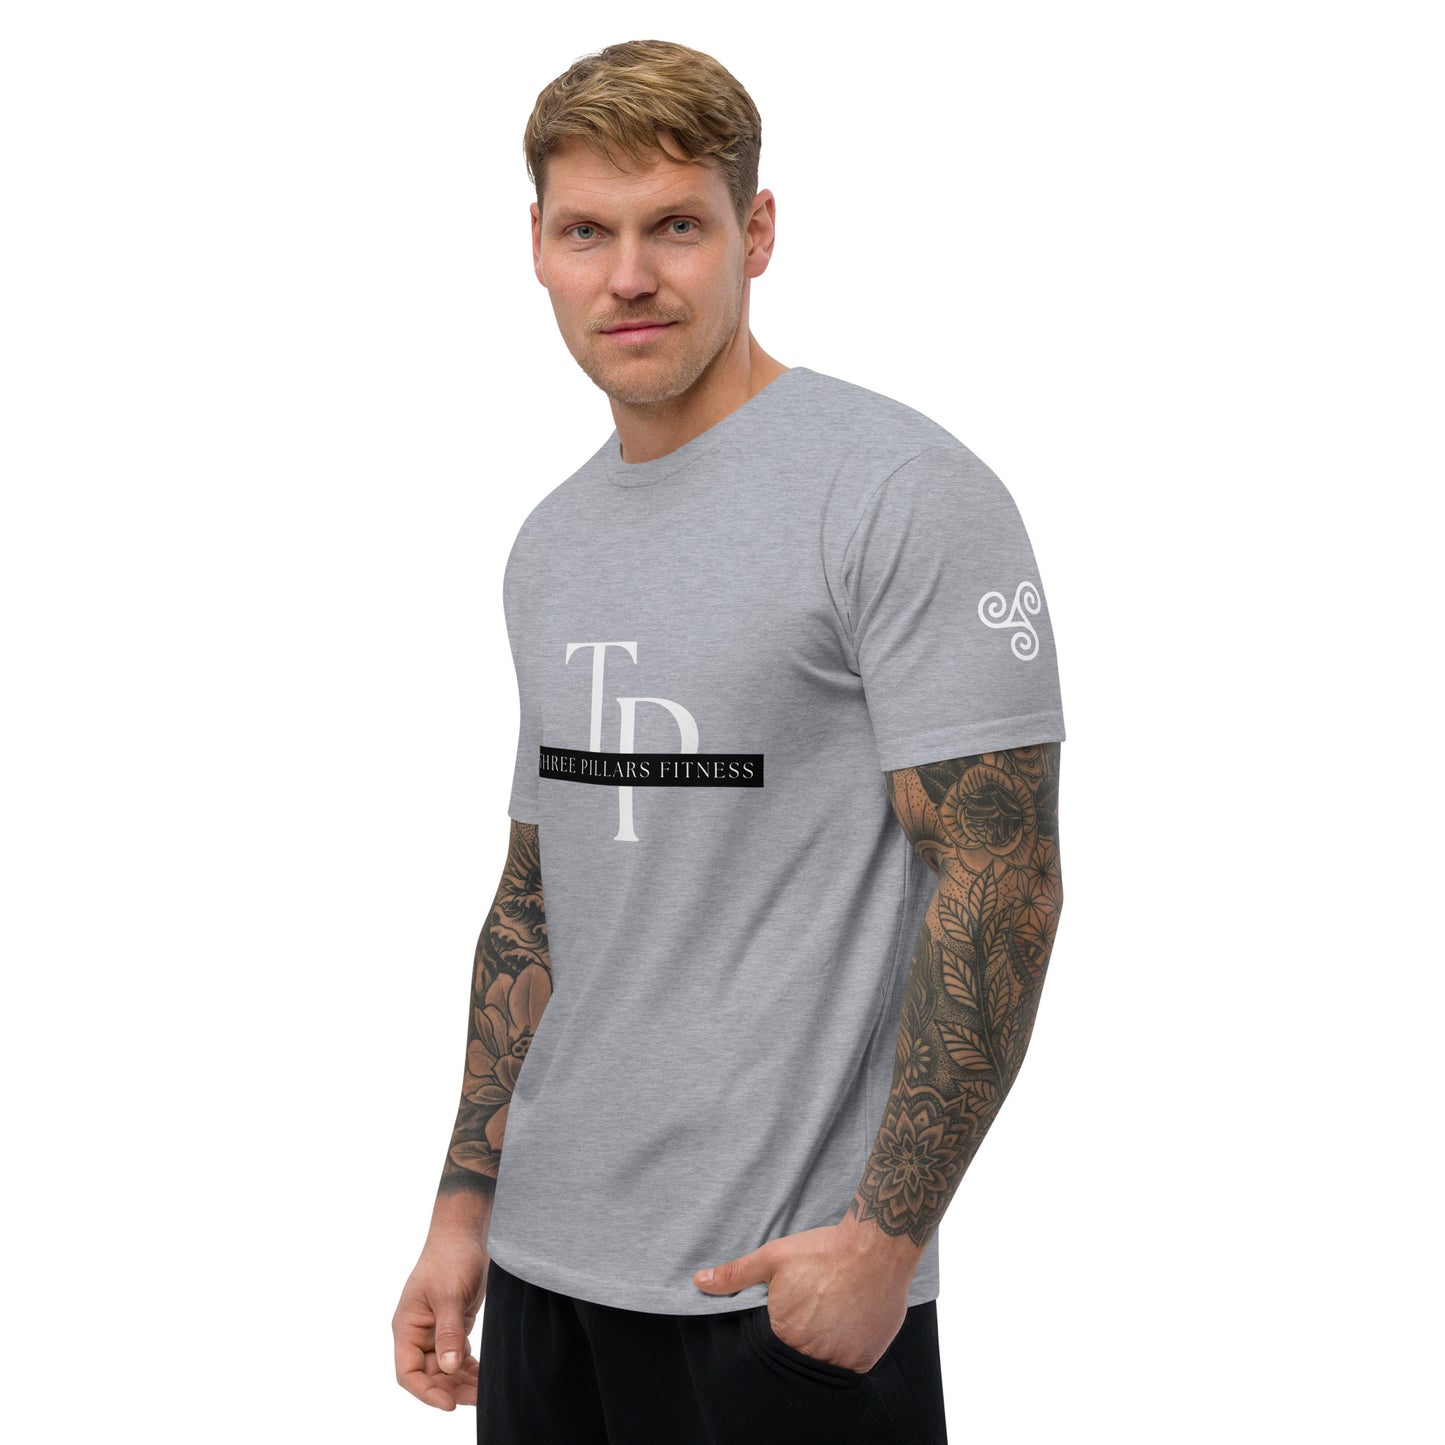 Fitted Gym Shirt